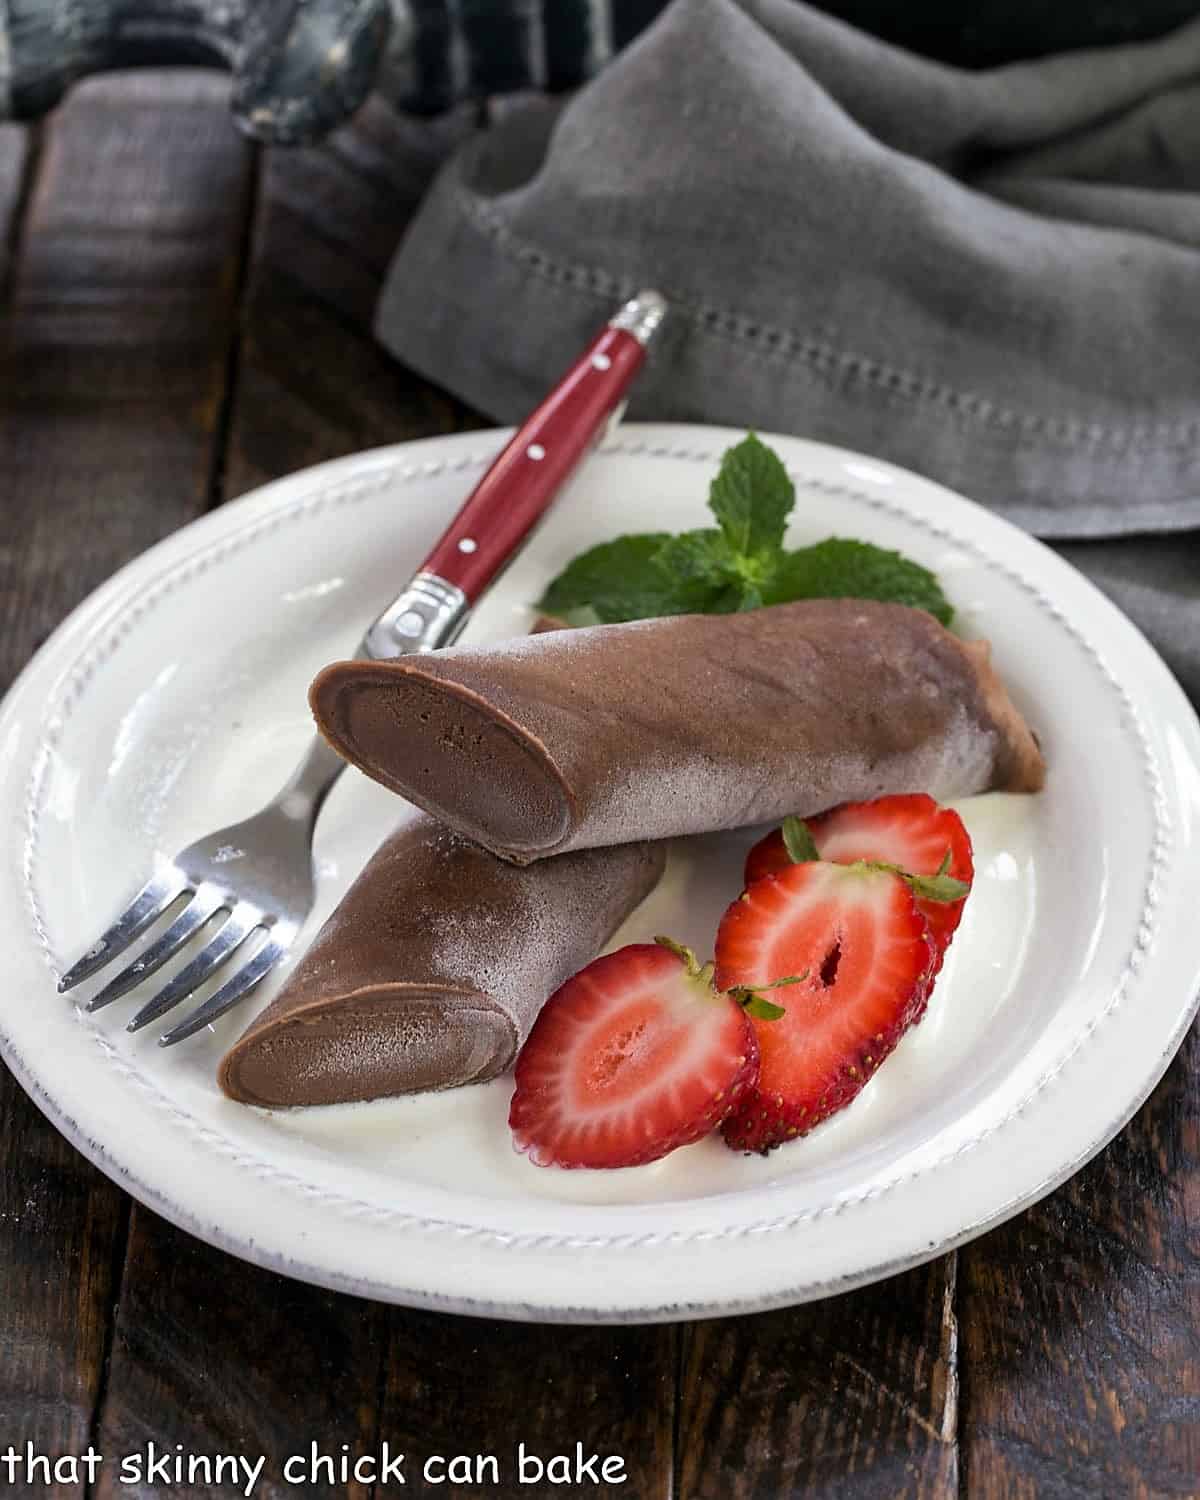 Frozen chocolate crepe sliced in half and served over creme Anglaise with sliced strawberries.